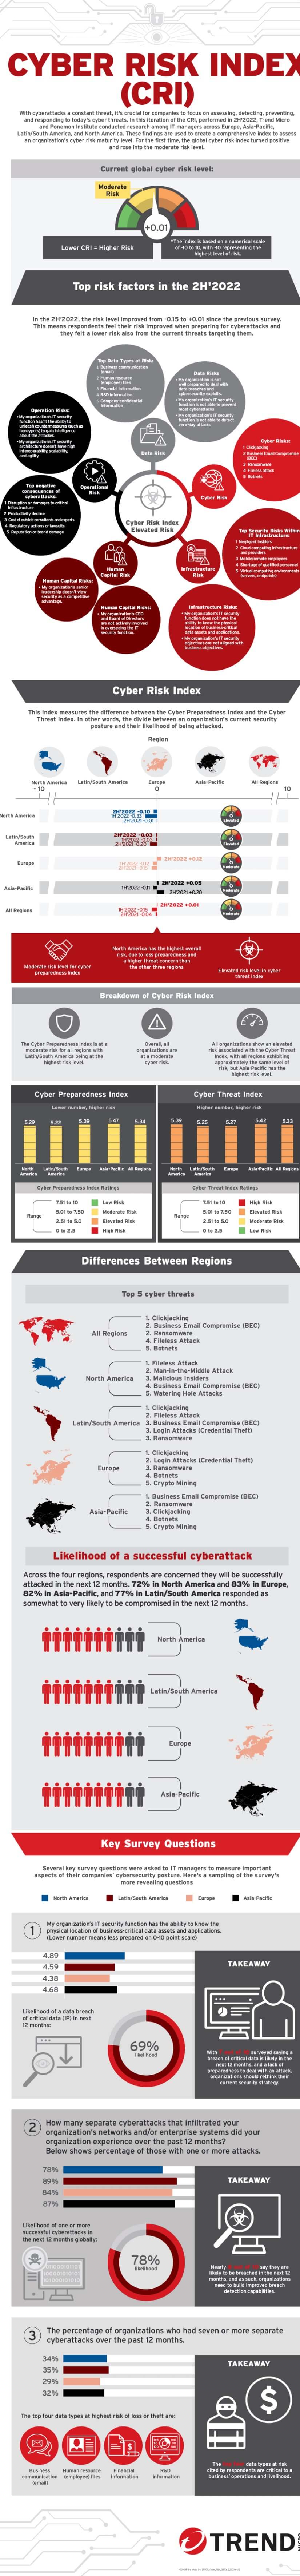 Cyber_Risk_Index